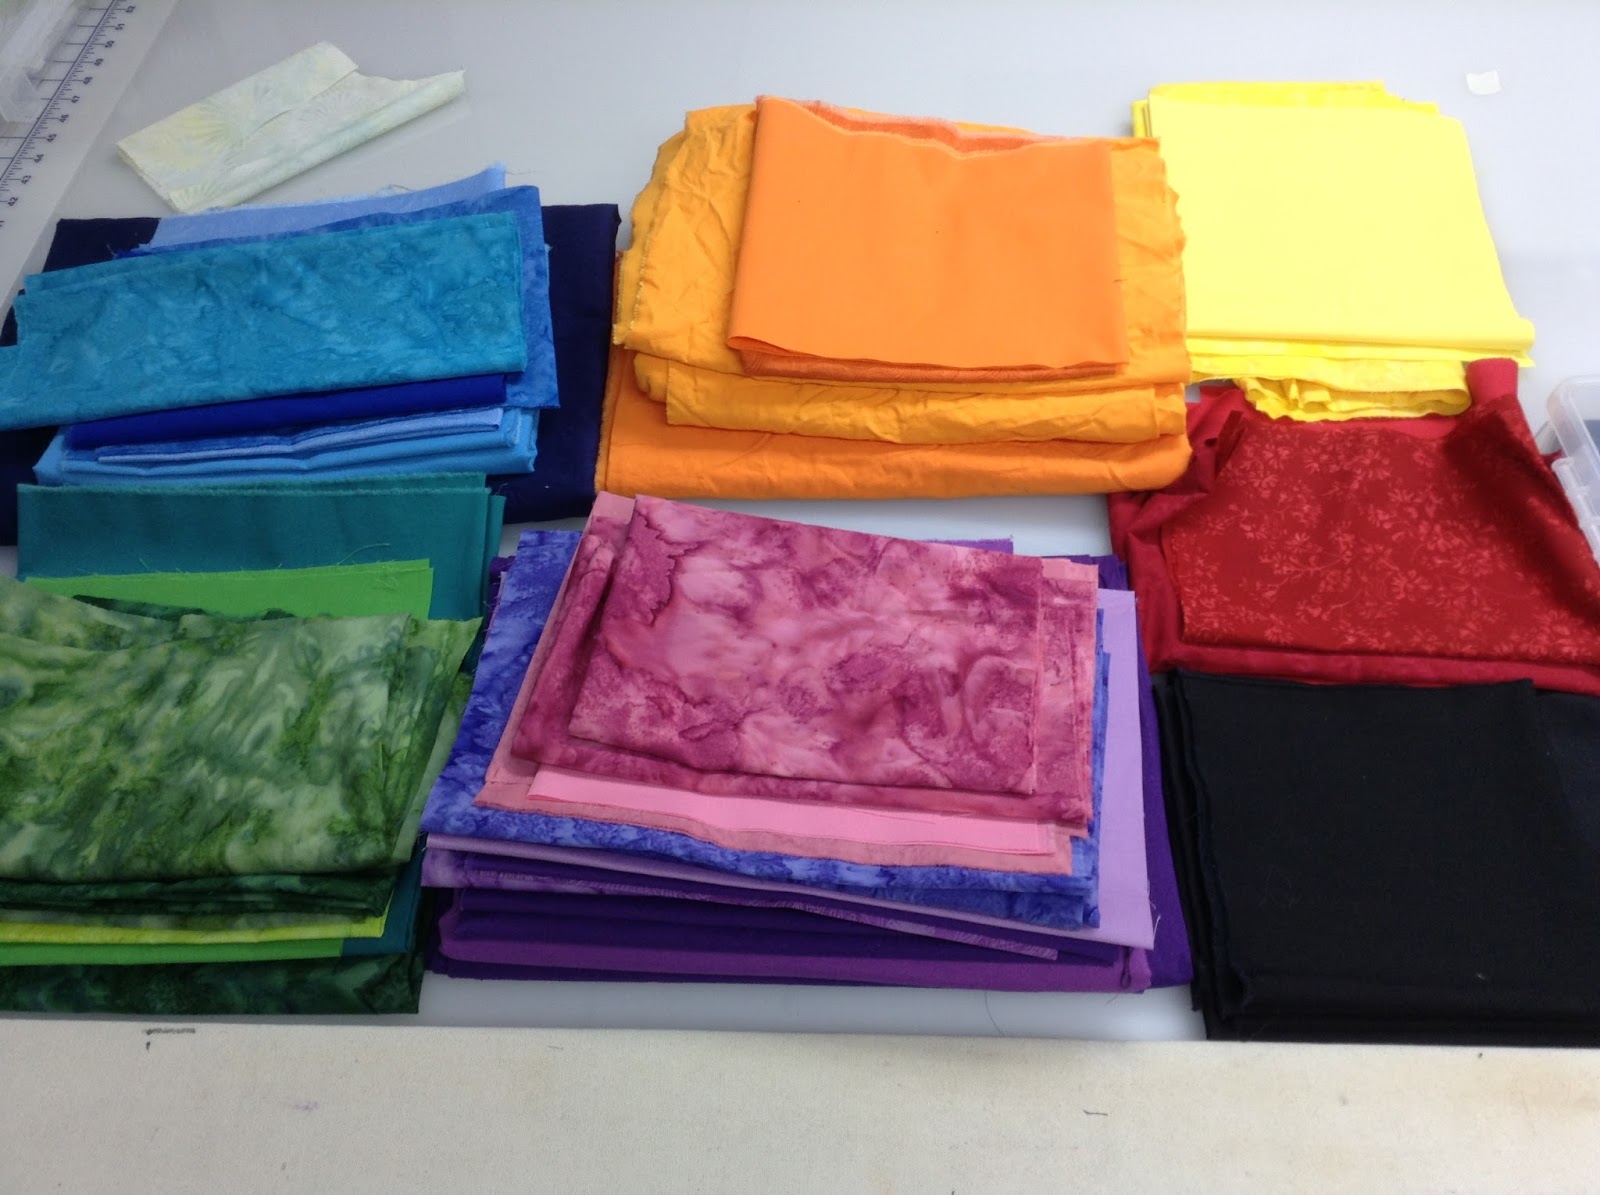 Download The Free Motion Quilting Project: Color Play and Ruler Rant